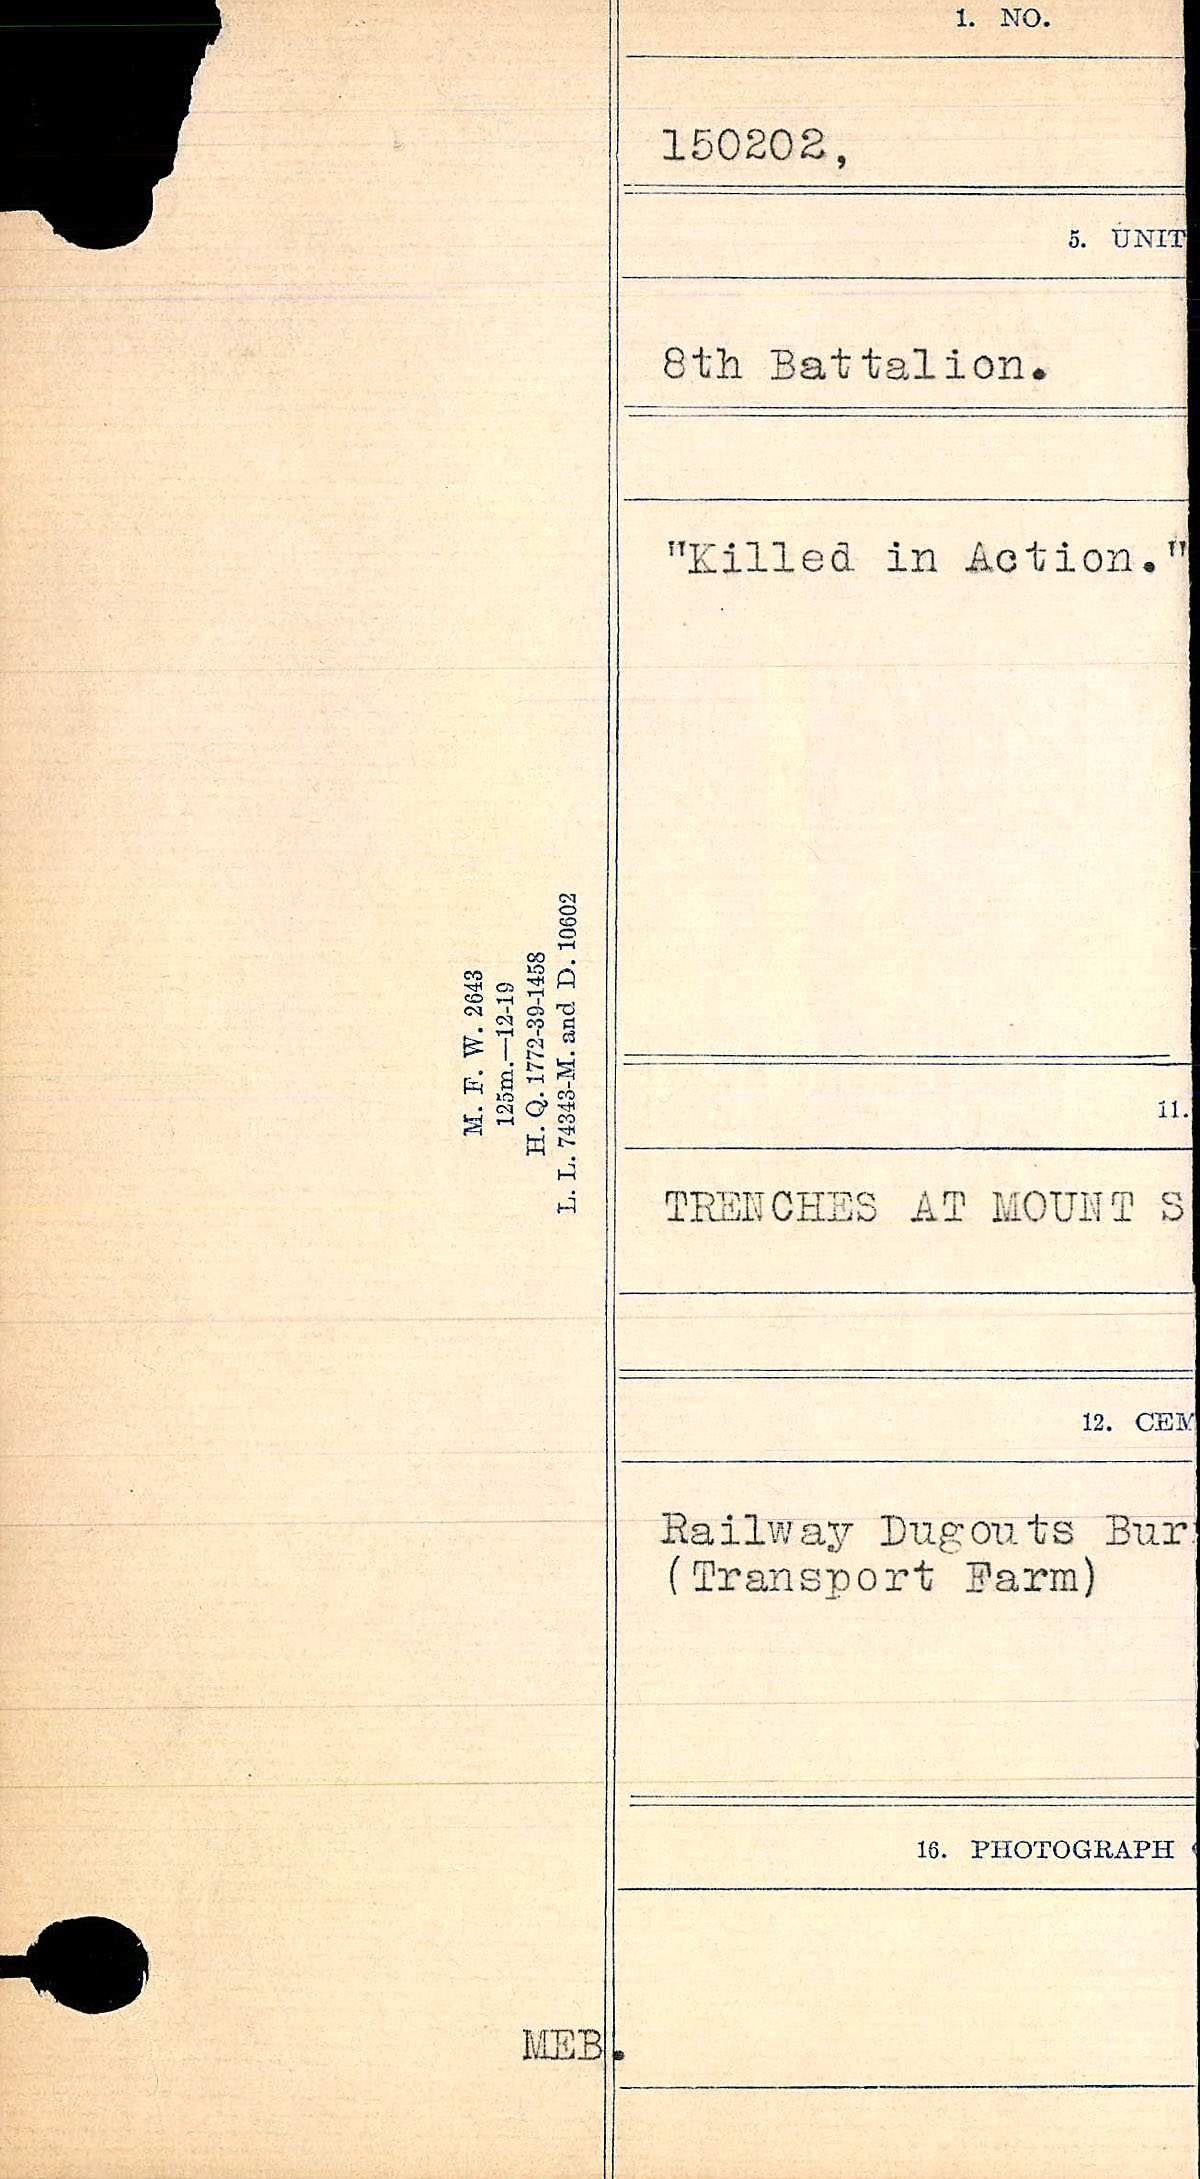 Title: Circumstances of Death Registers, First World War - Mikan Number: 46246 - Microform: 31829_B016769